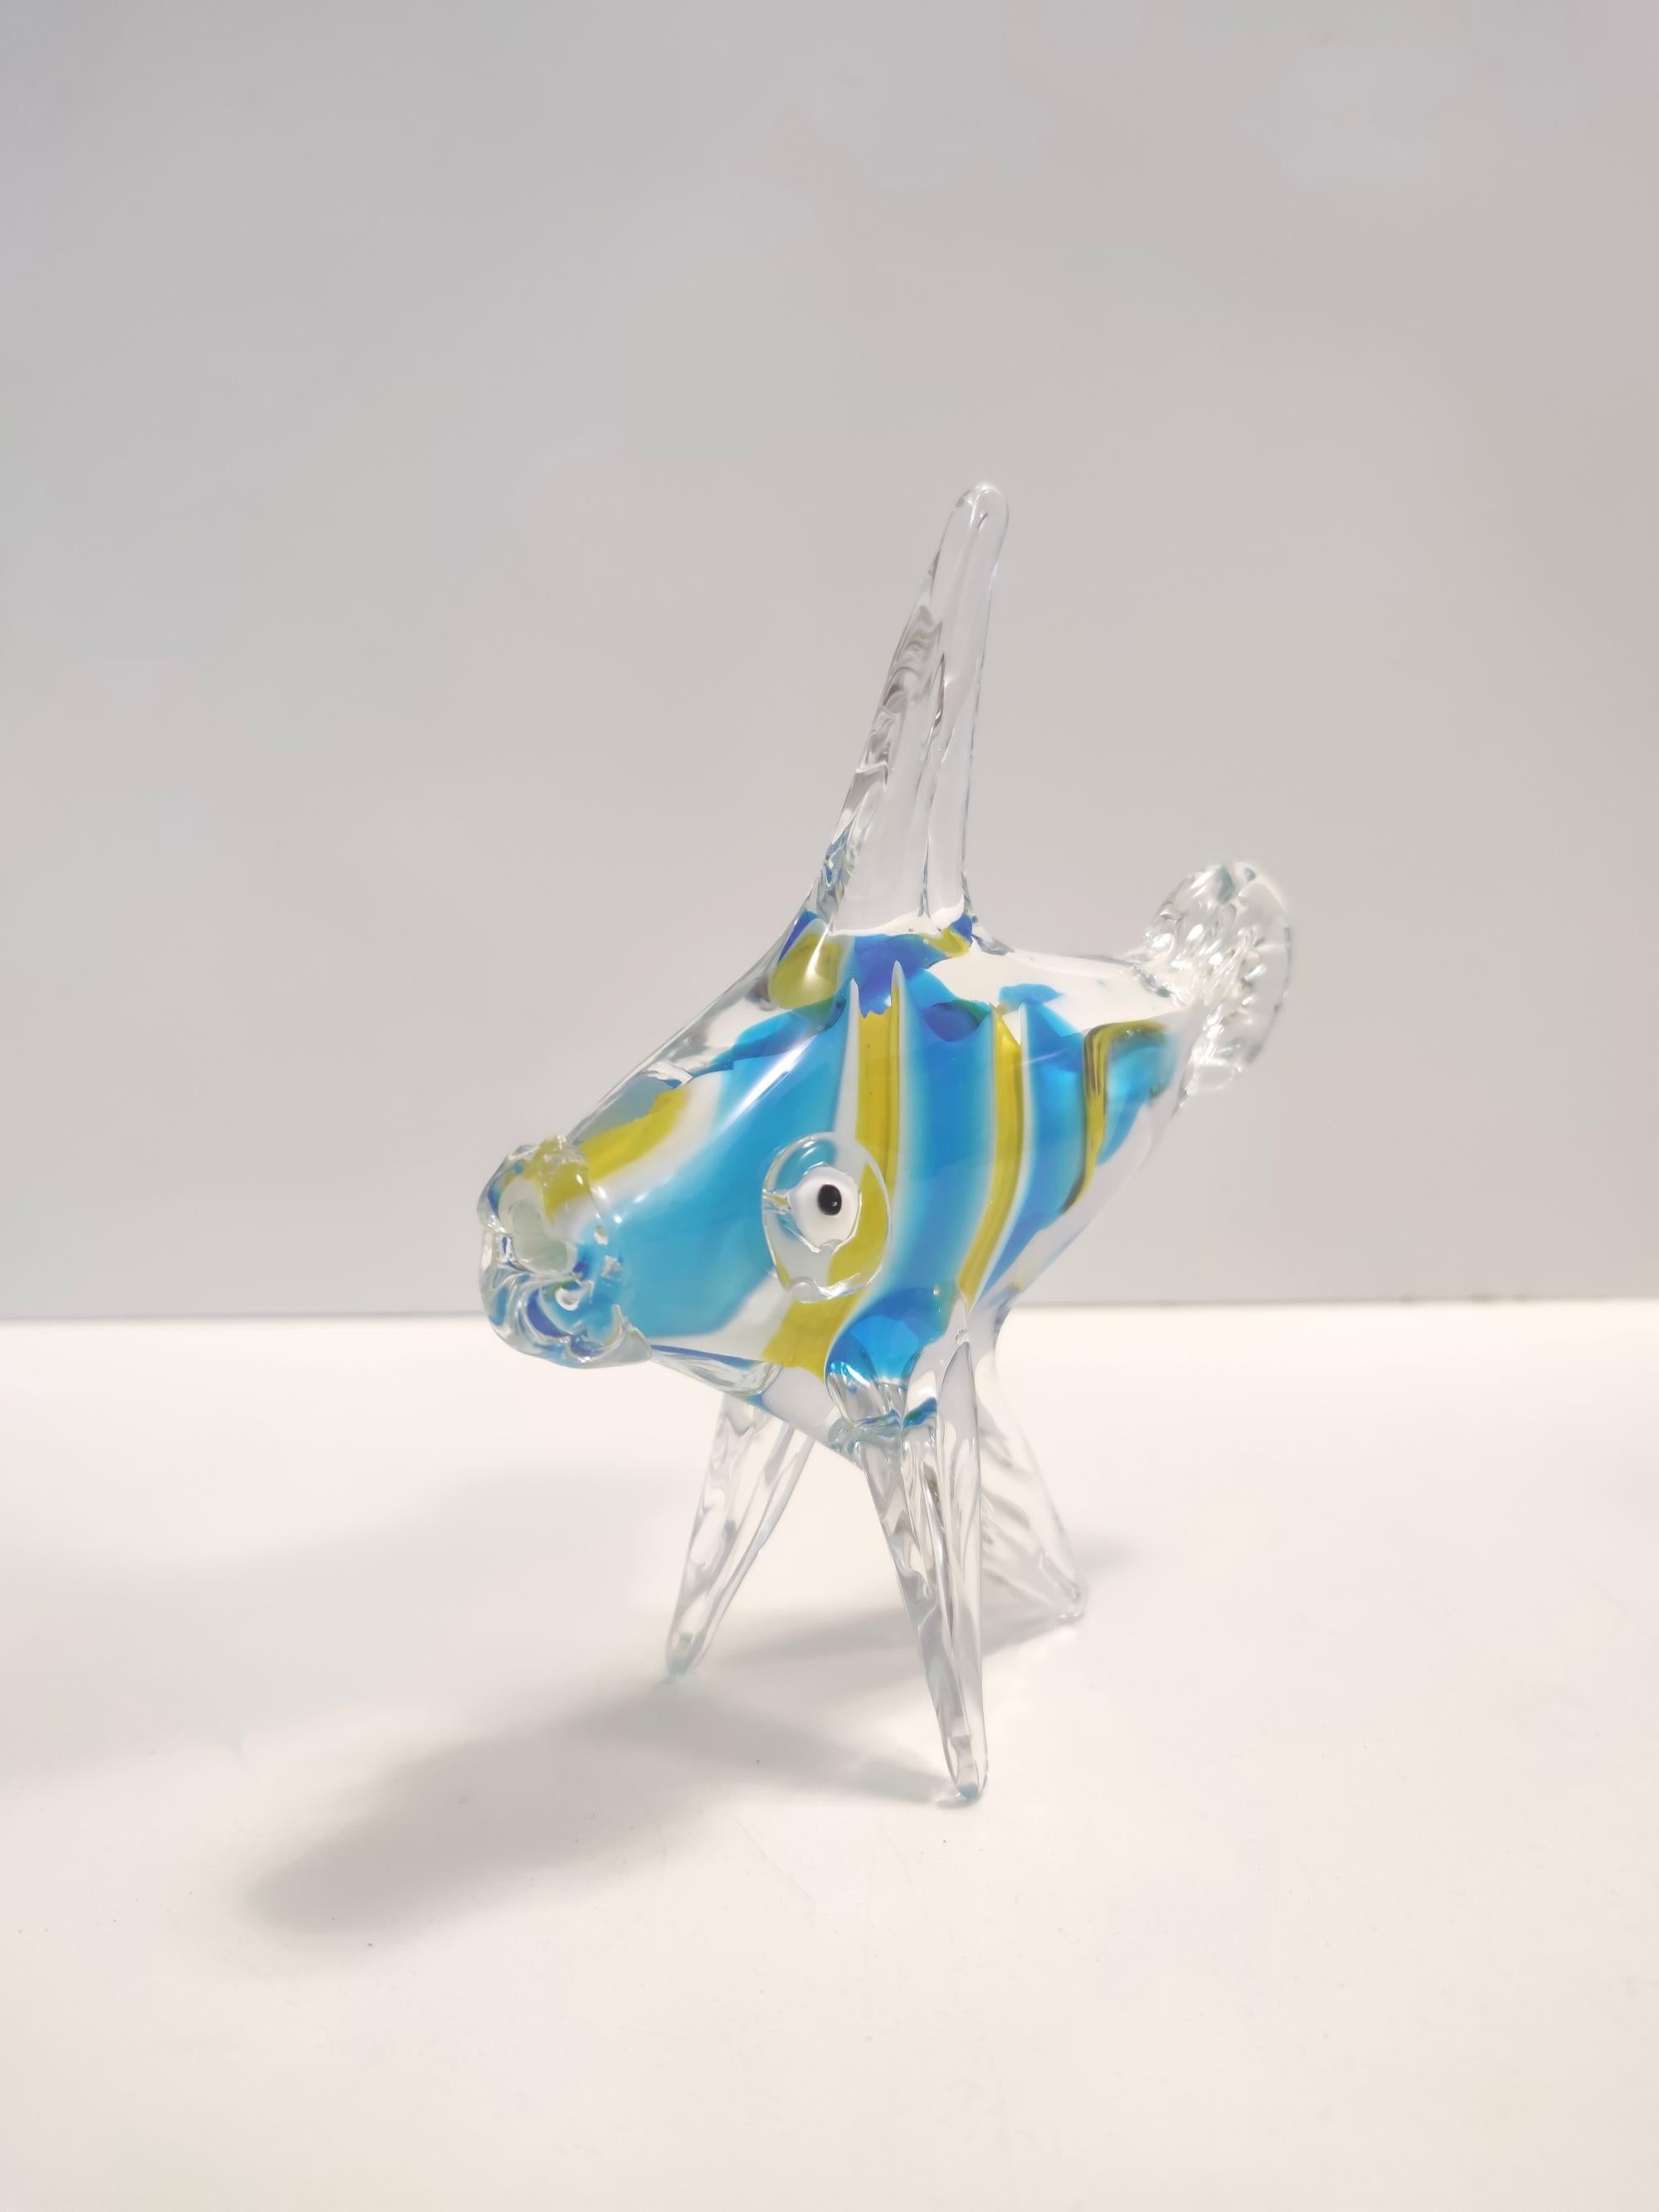 Murano, Italy, 1950s. 
This fish is made in hand-blown Murano glass.
It is a vintage piece, therefore it might show slight traces of use, but it can be considered as in excellent original condition and ready to become a piece in a home.

Measures: